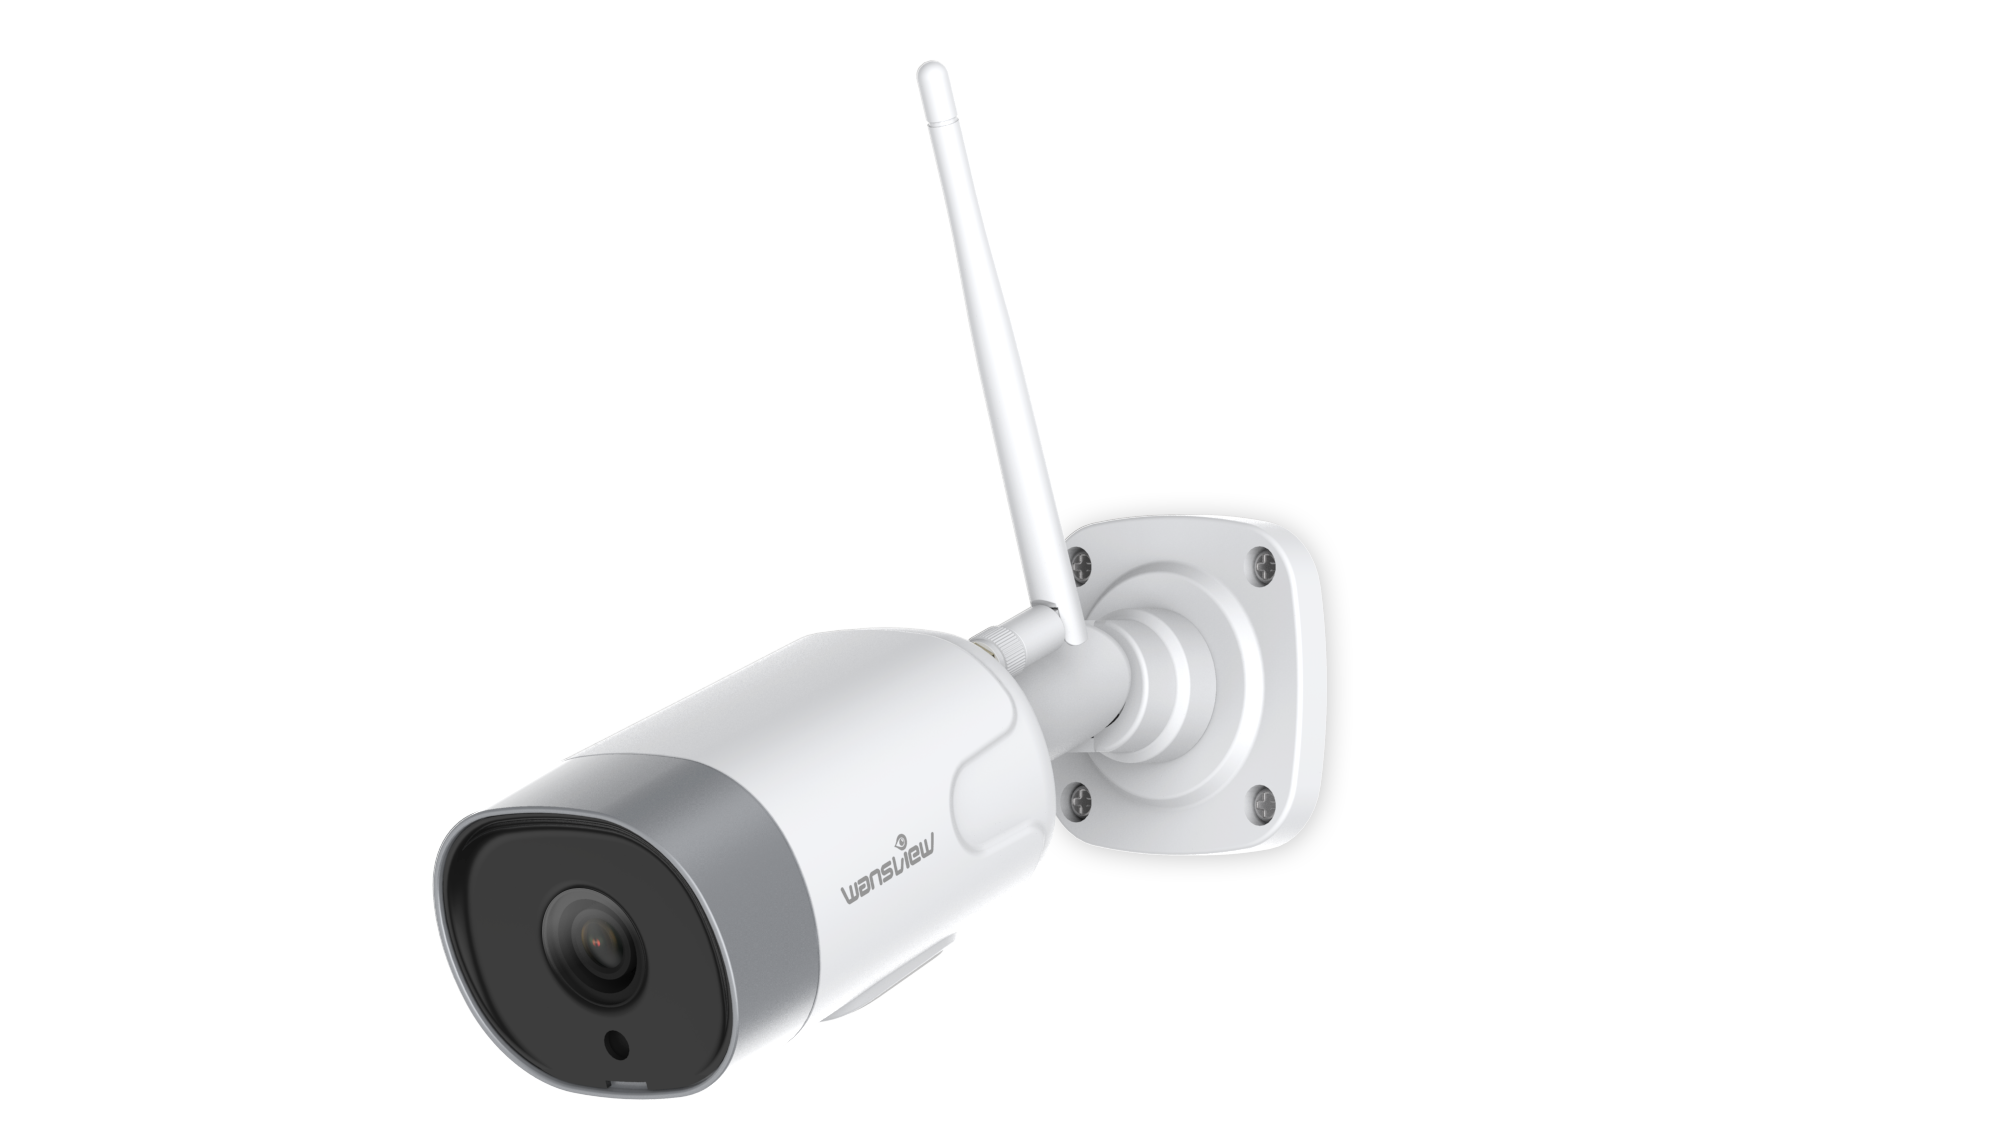 The webcam can connect to several mobile phones